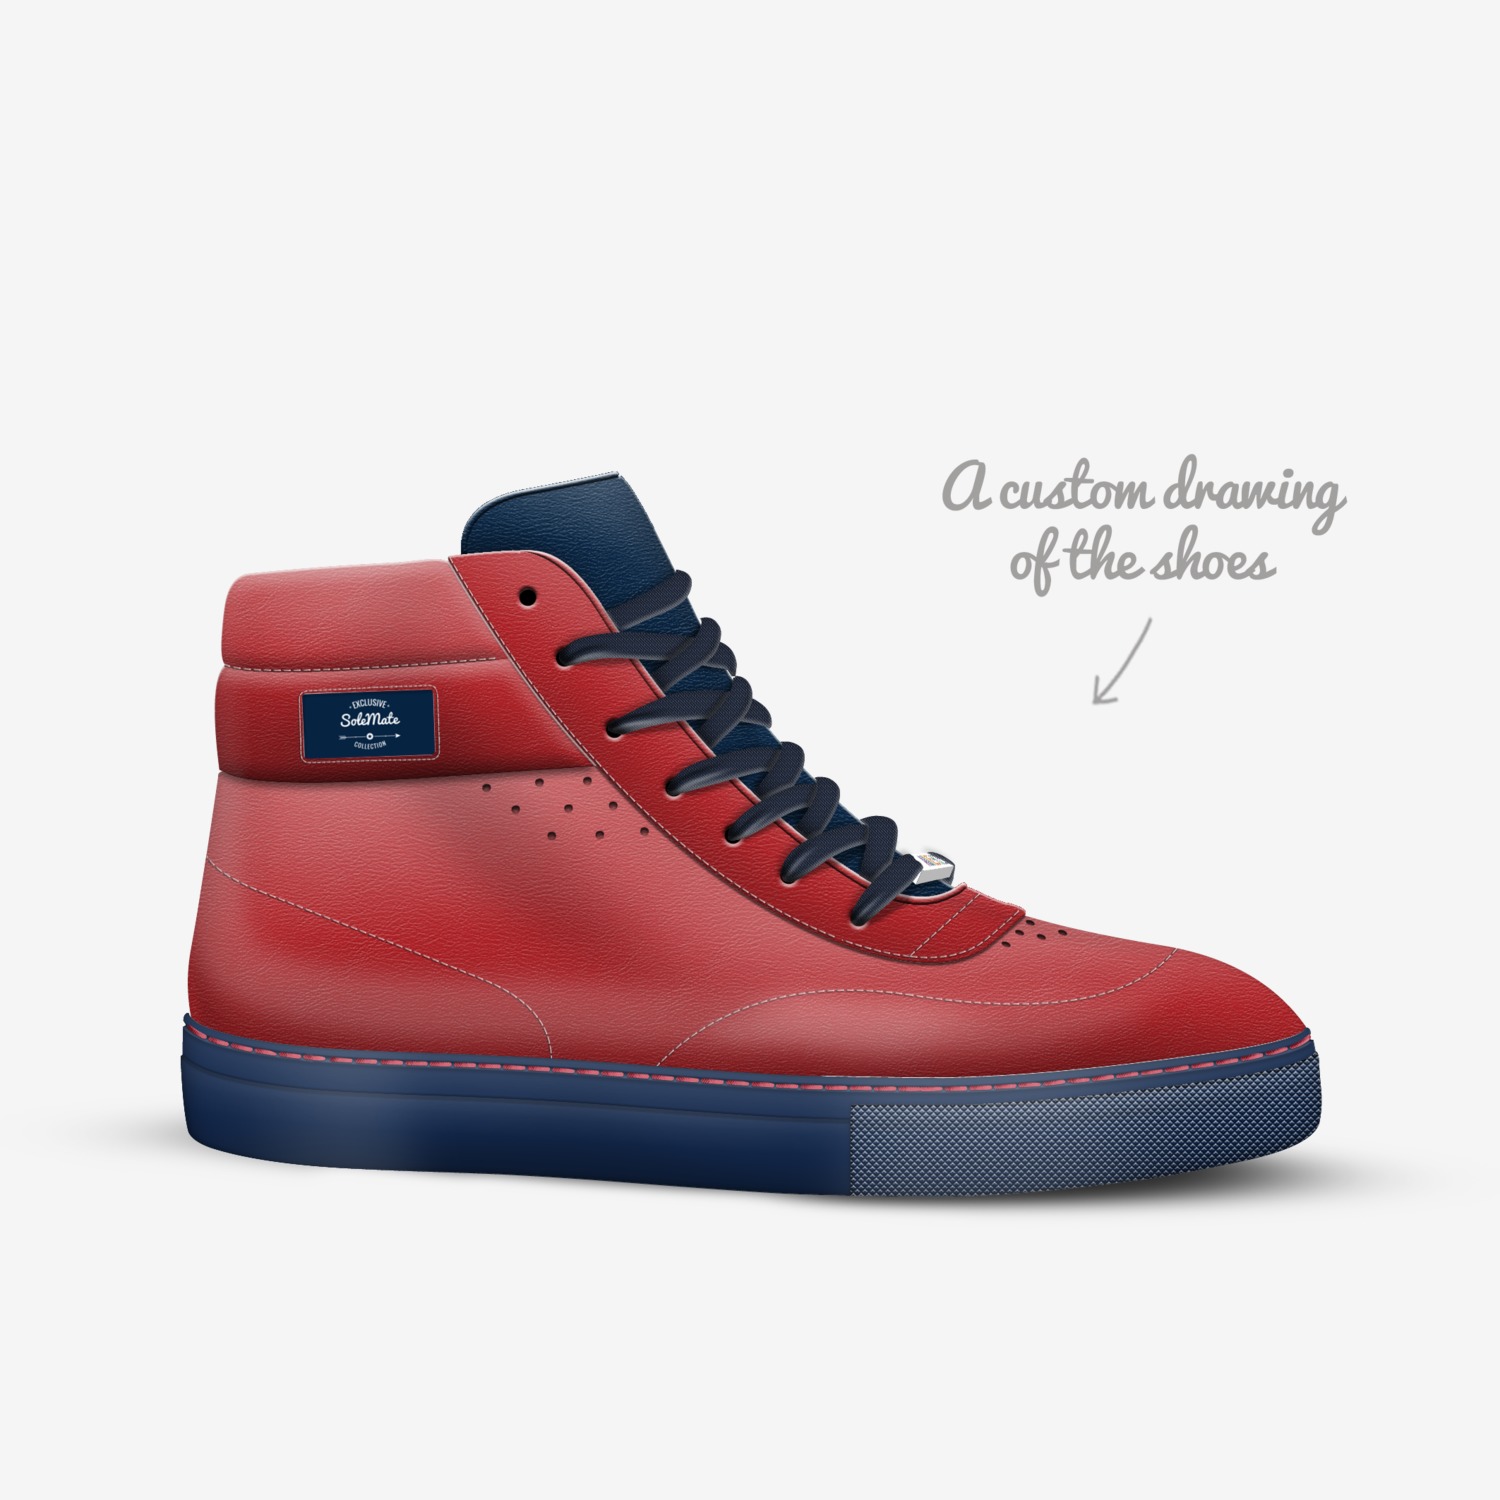 favor trappe Krympe SoleMate | A Custom Shoe concept by Durango Payne Mr.